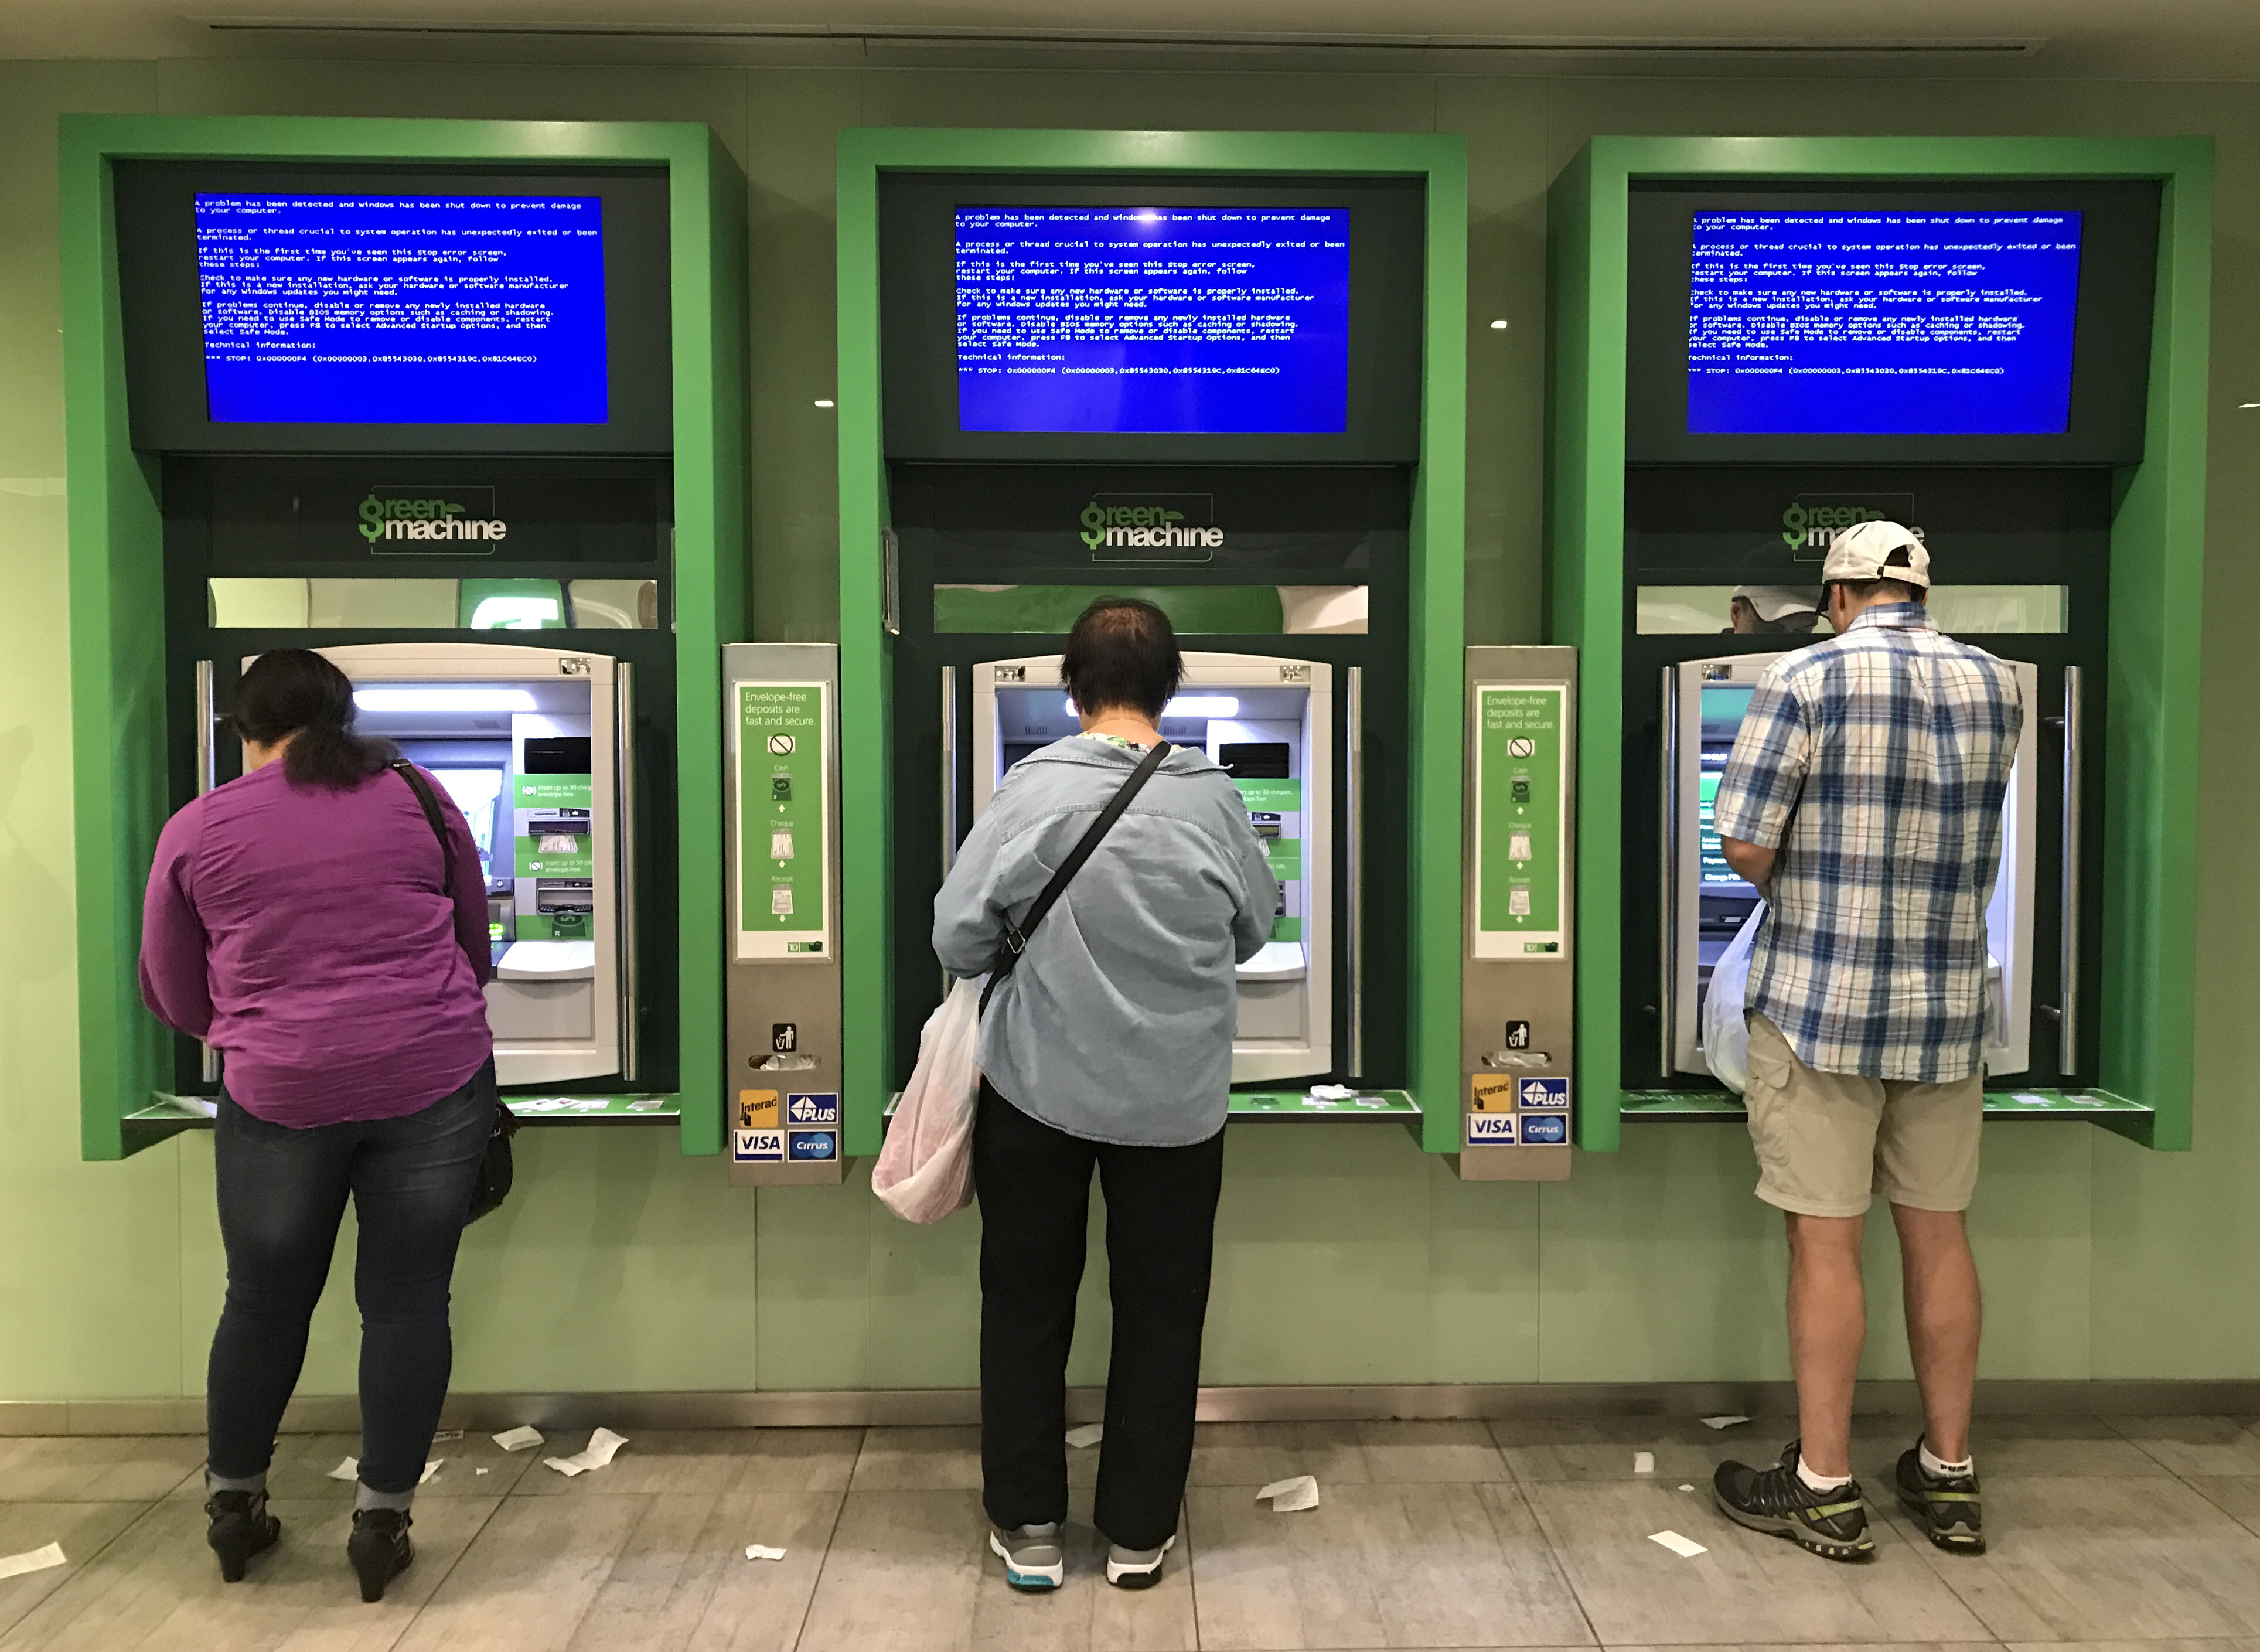 Customers use Toronto Dominion (TD) Bank ATM cash machines under video information screens showing a computer error in Toronto